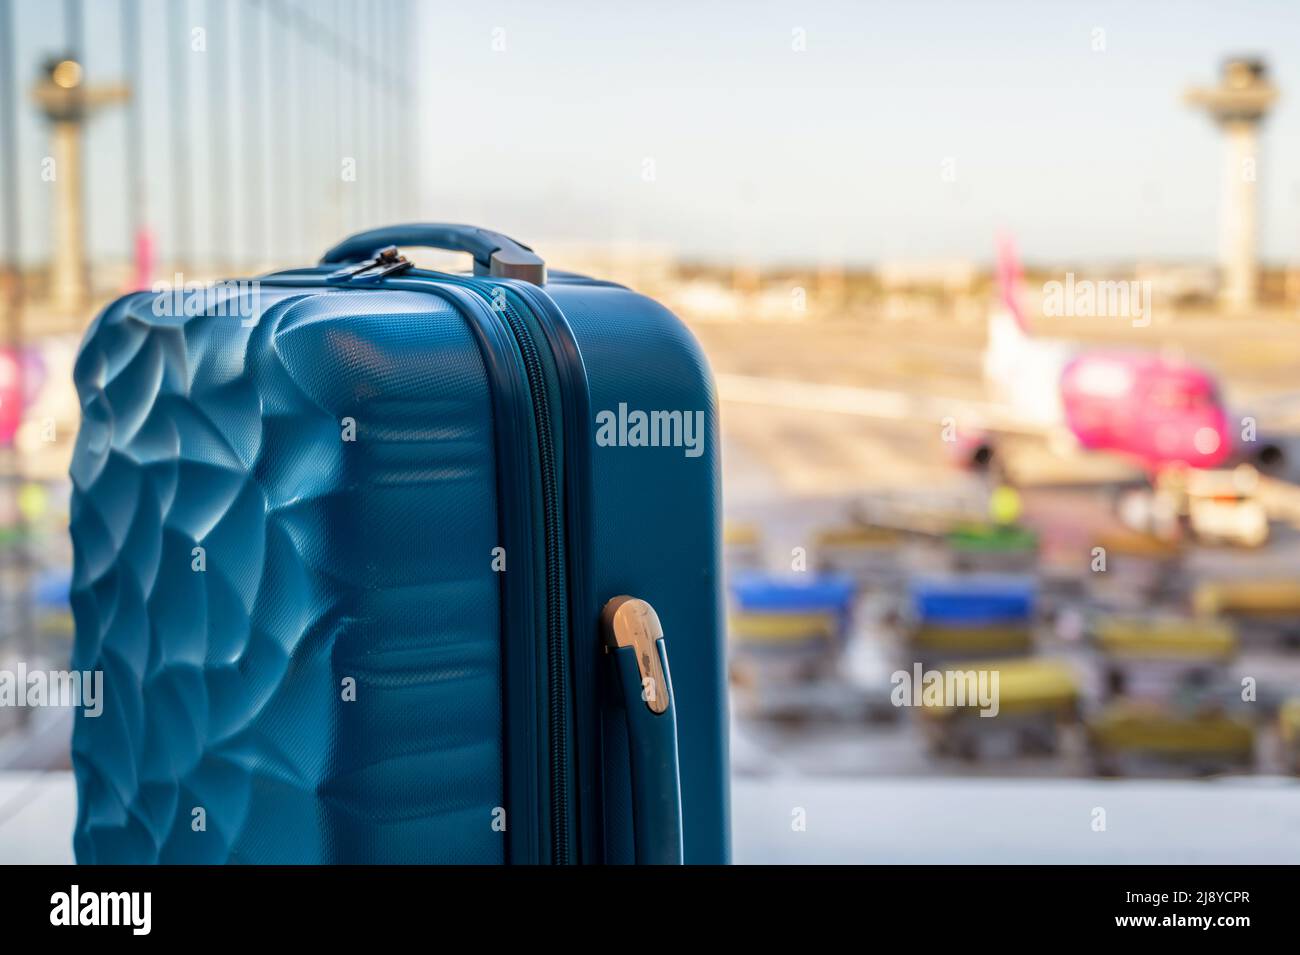 Suitcases as hand luggage at the terminal of an airport Stock Photo